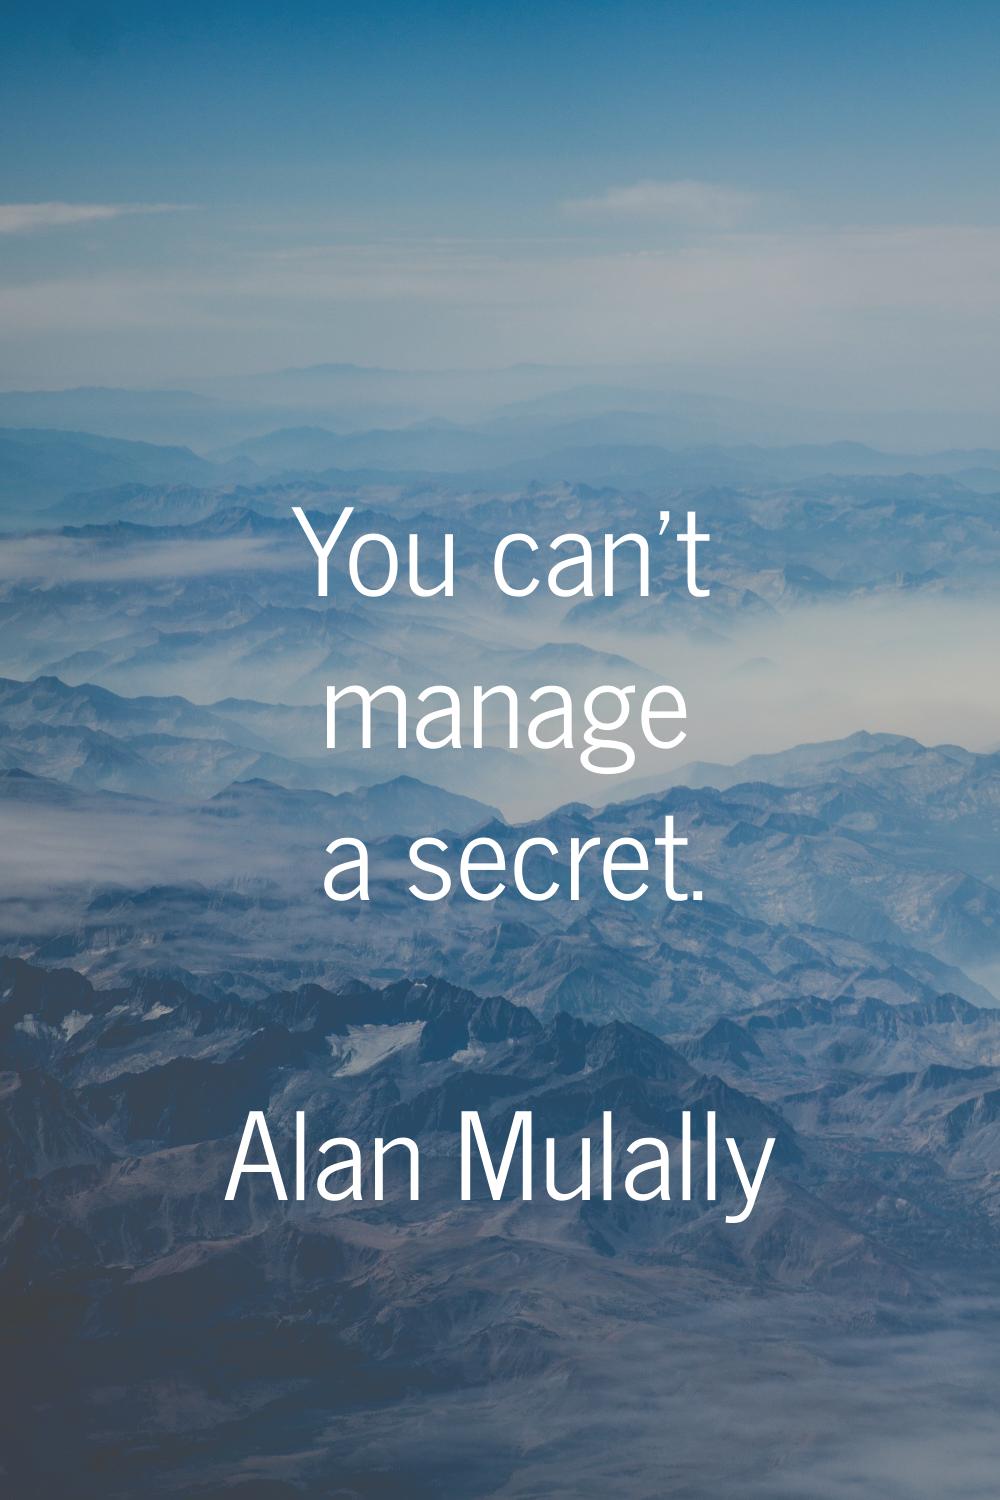 You can't manage a secret.